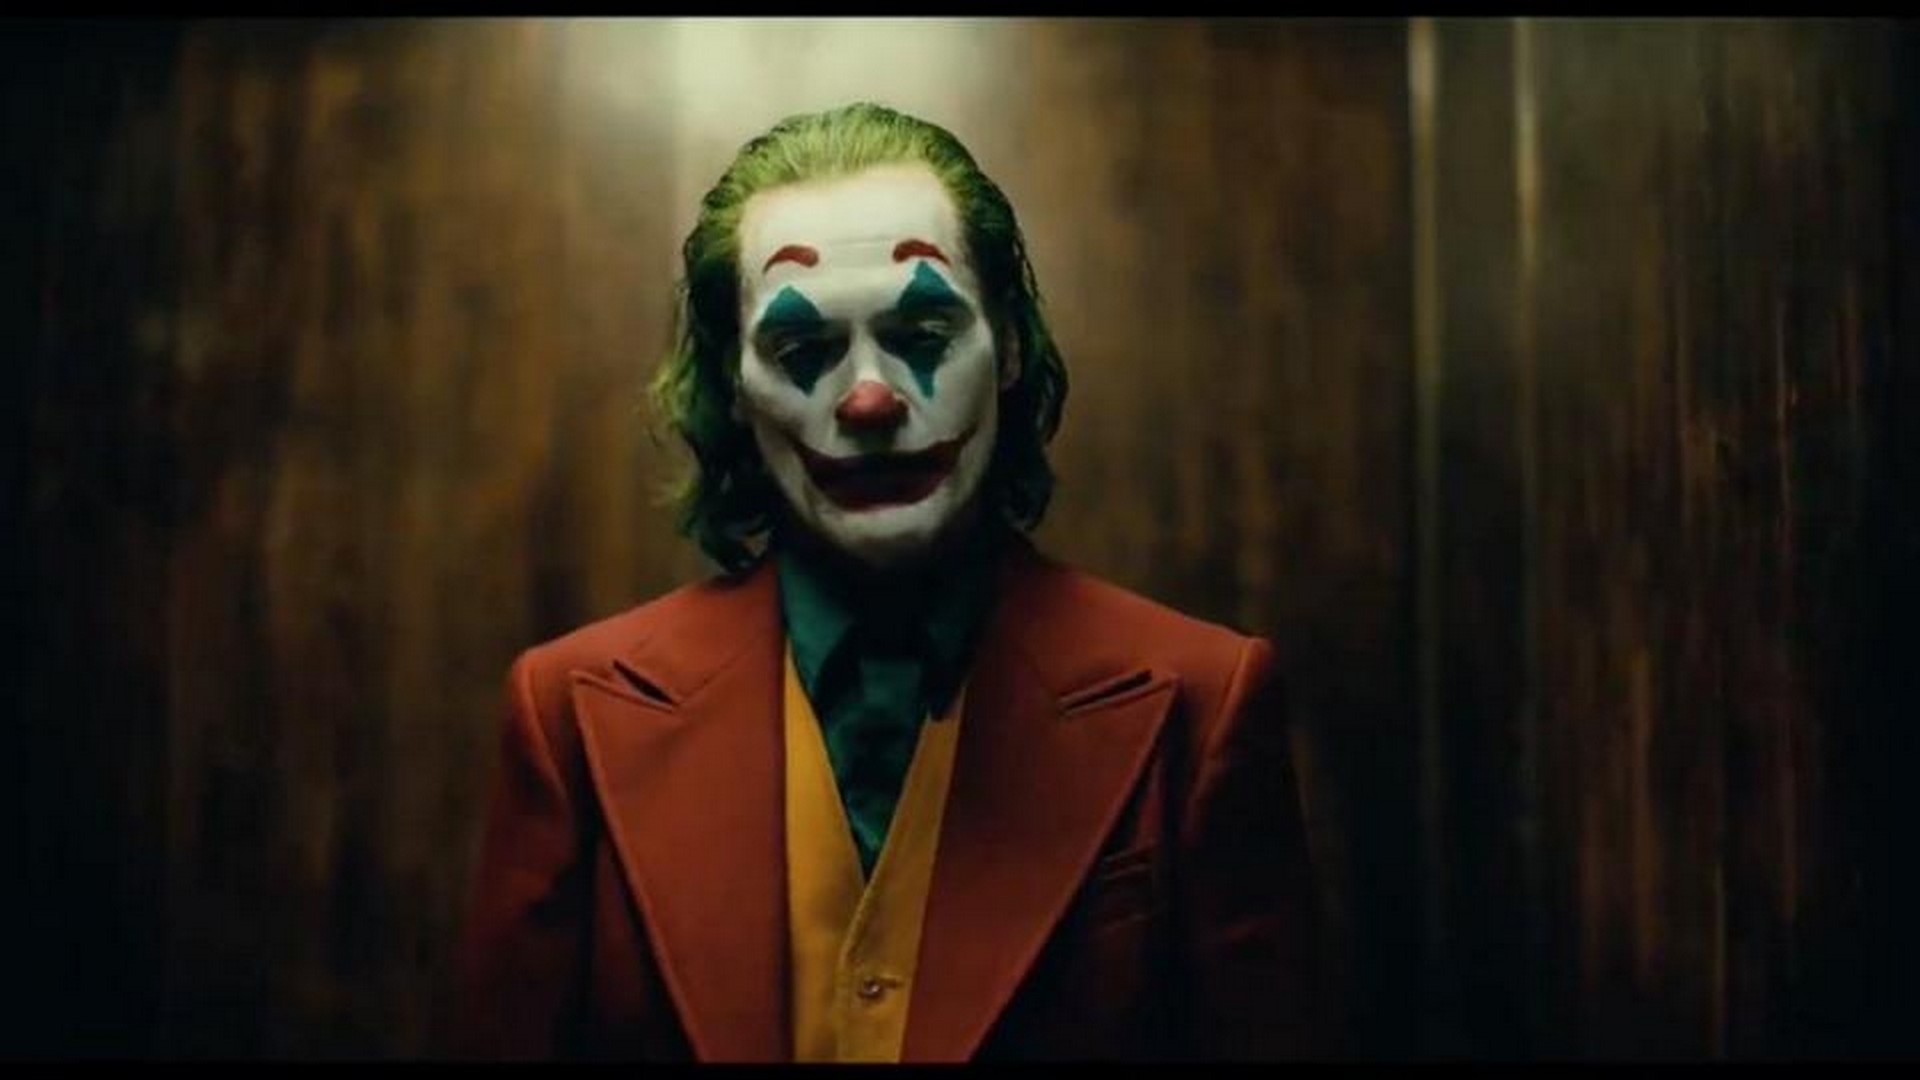 Joker 2019 Trailer Wallpaper with high-resolution 1920x1080 pixel. You can use this poster wallpaper for your Desktop Computers, Mac Screensavers, Windows Backgrounds, iPhone Wallpapers, Tablet or Android Lock screen and another Mobile device